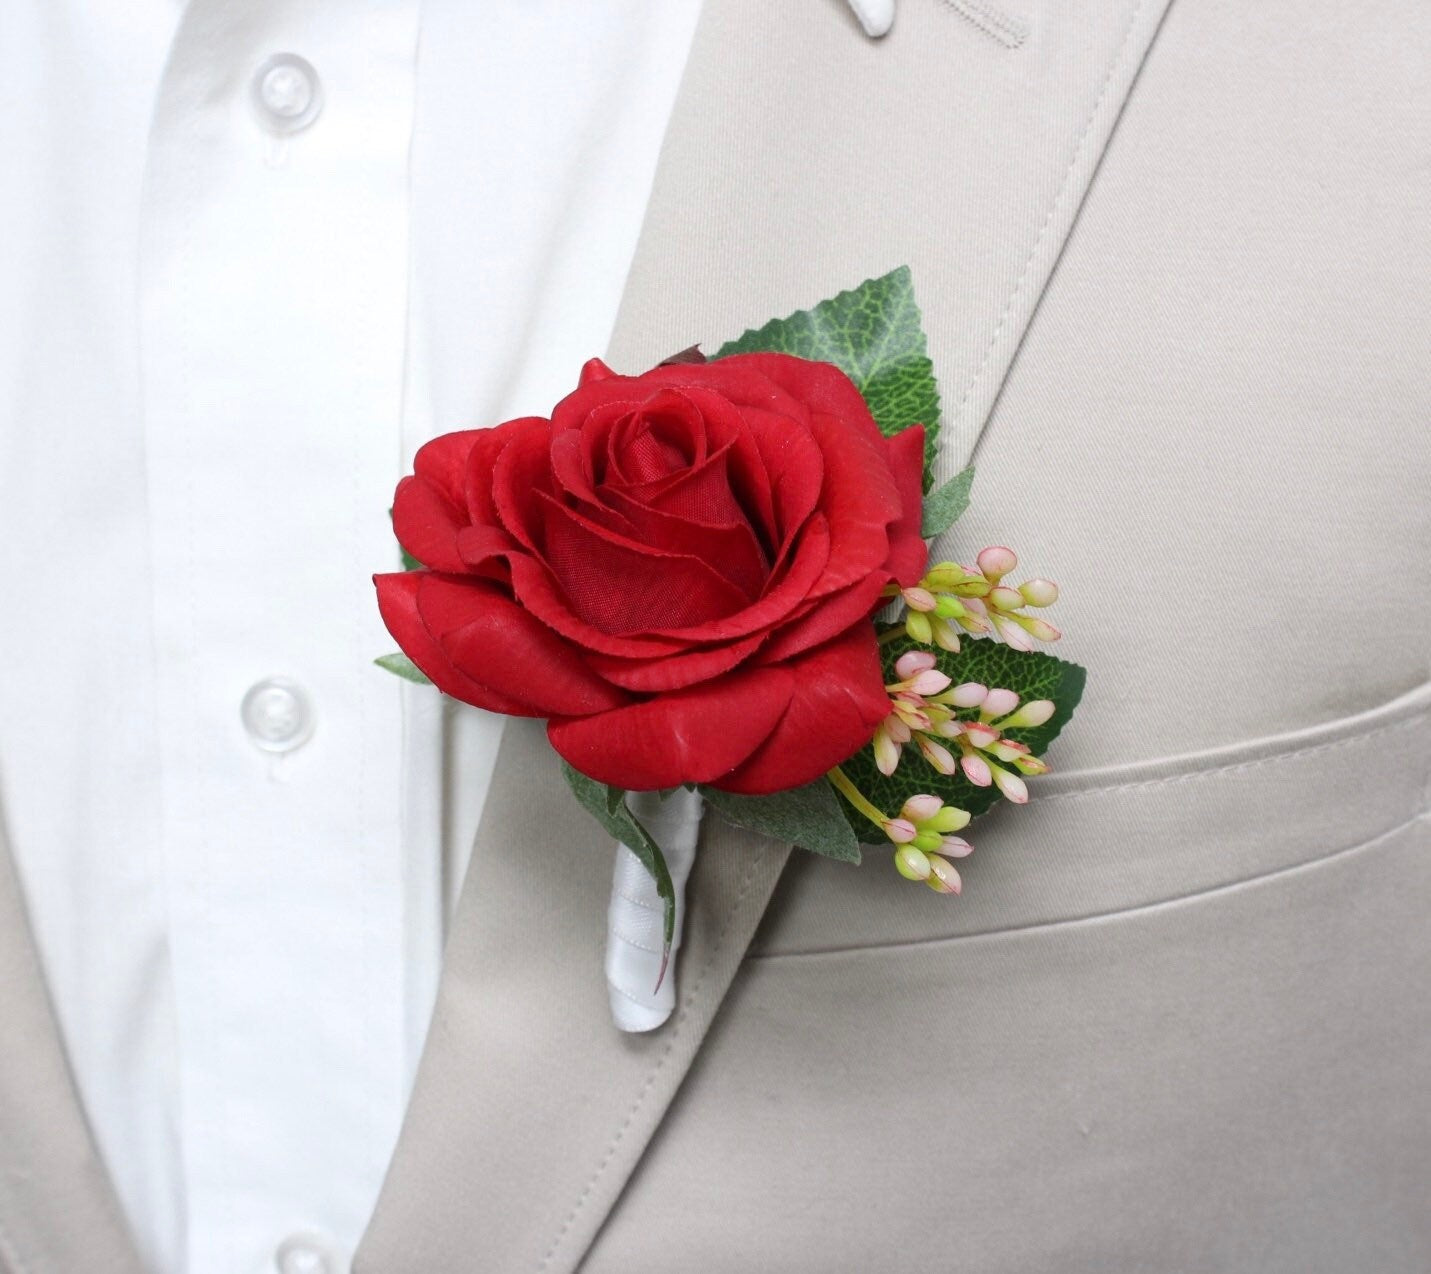 Lifelike Red Rose Boutonniere with Custom Ribbon - Ideal for Weddings, Proms & Events